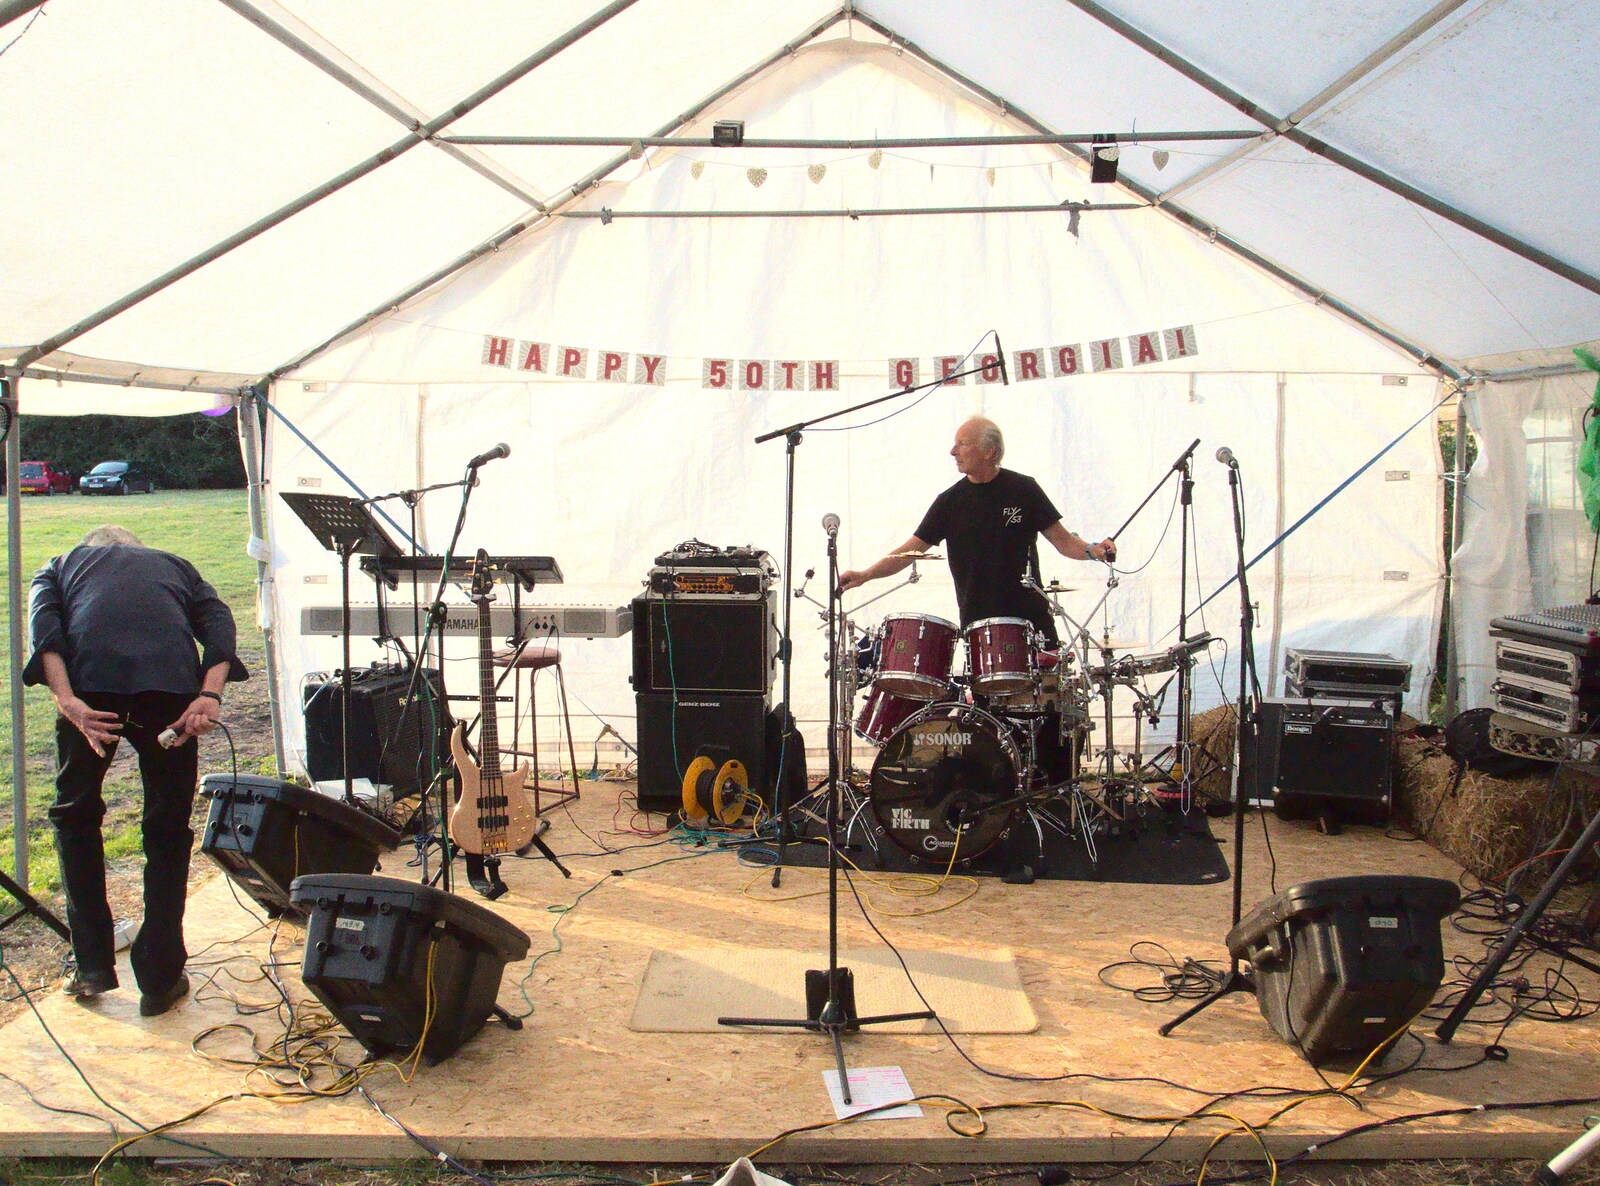 The stage from Soph the Roph's Birthday and The BBs at Pulham, Norfolk - 22nd July 2015